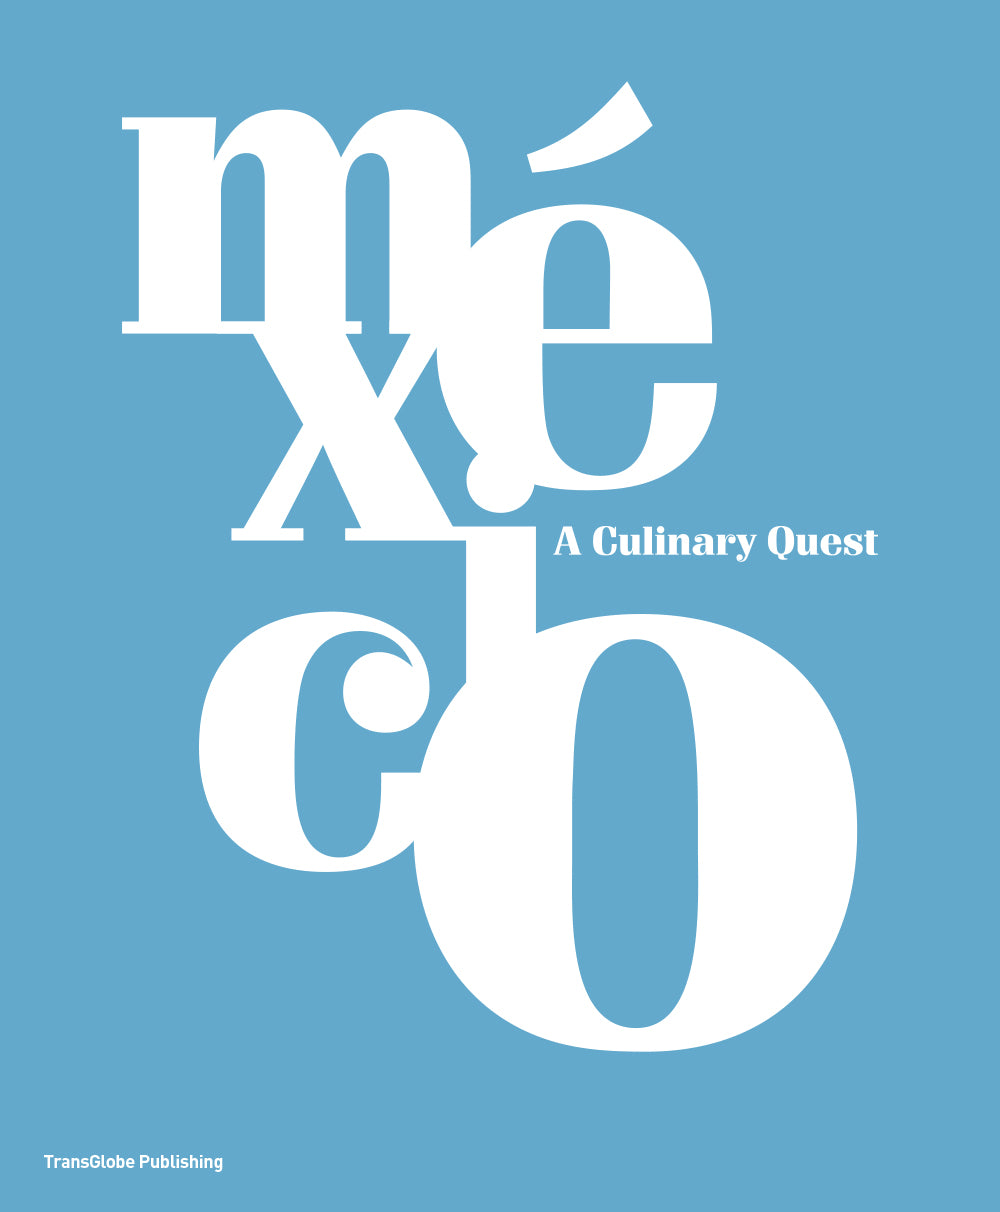 México: A Culinary Quest (Royal boxed edition)